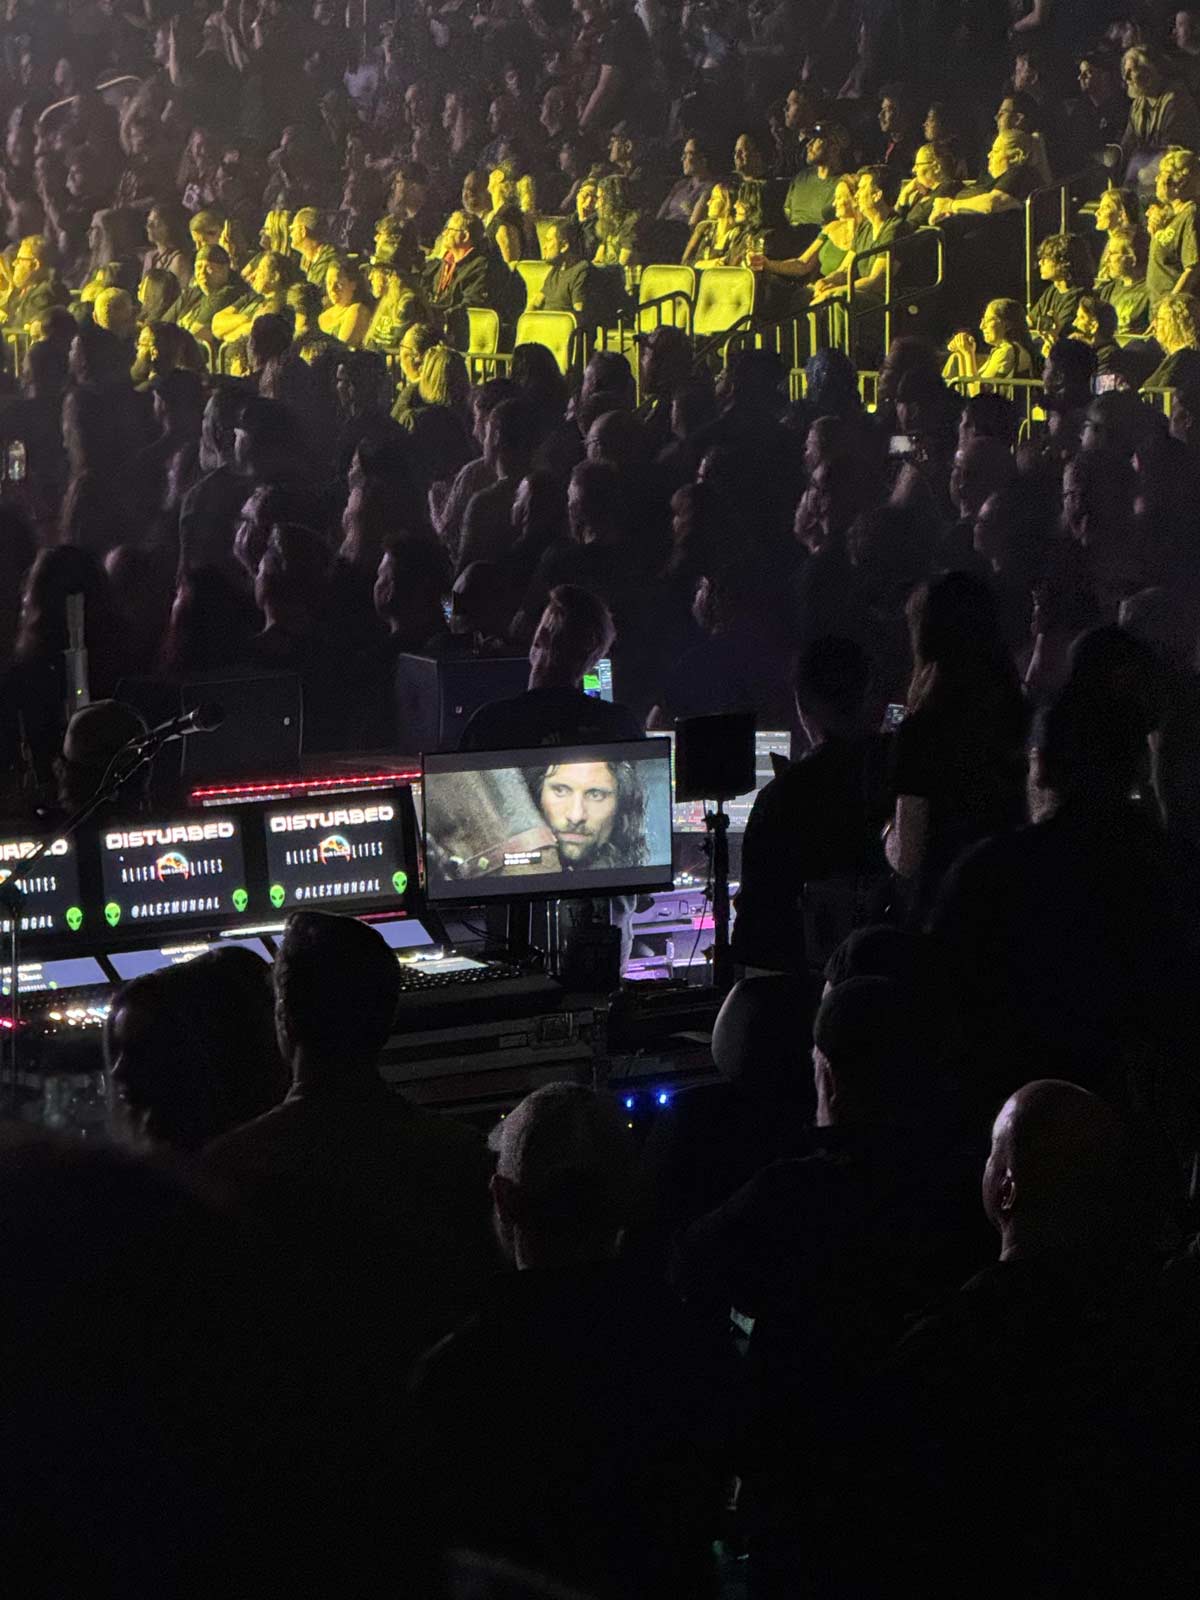 Technical crew watching Lord of the Rings during a Disturbed concert